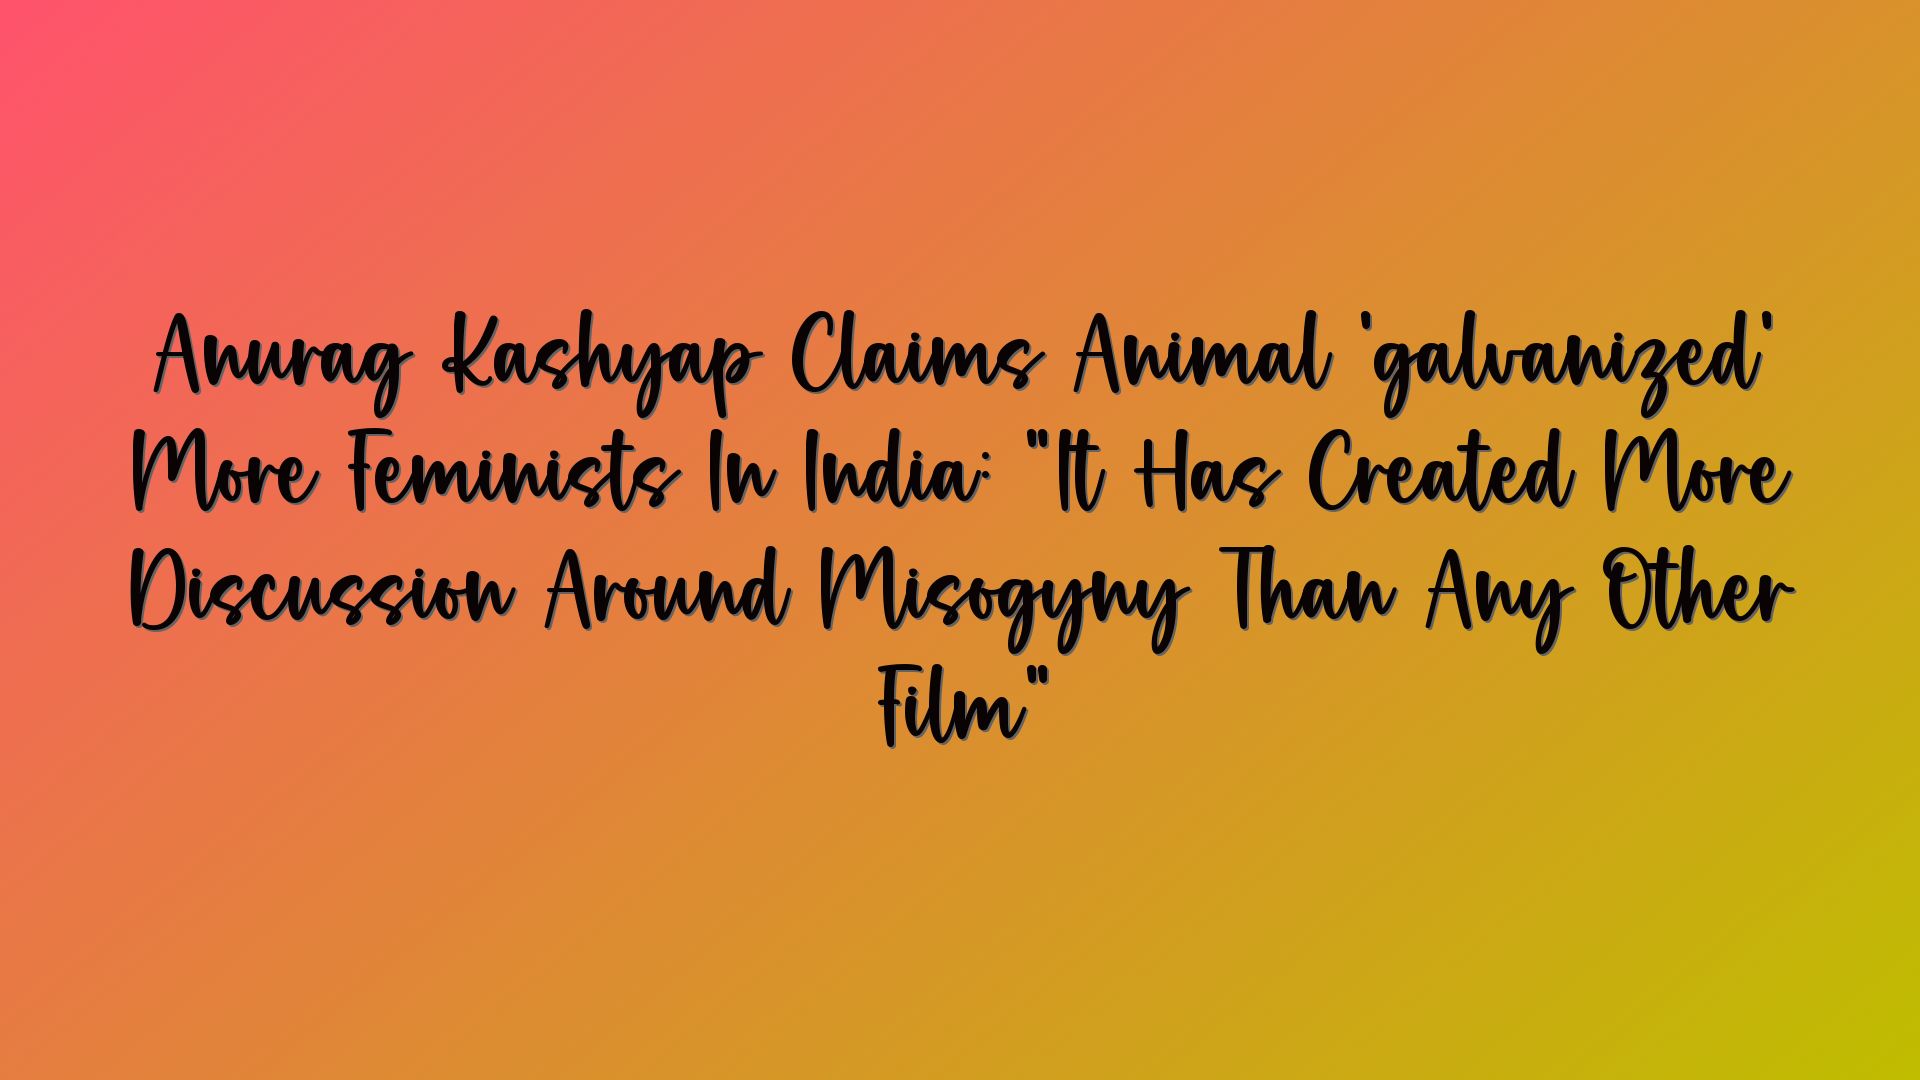 Anurag Kashyap Claims Animal ‘galvanized’ More Feminists In India: “It Has Created More Discussion Around Misogyny Than Any Other Film”